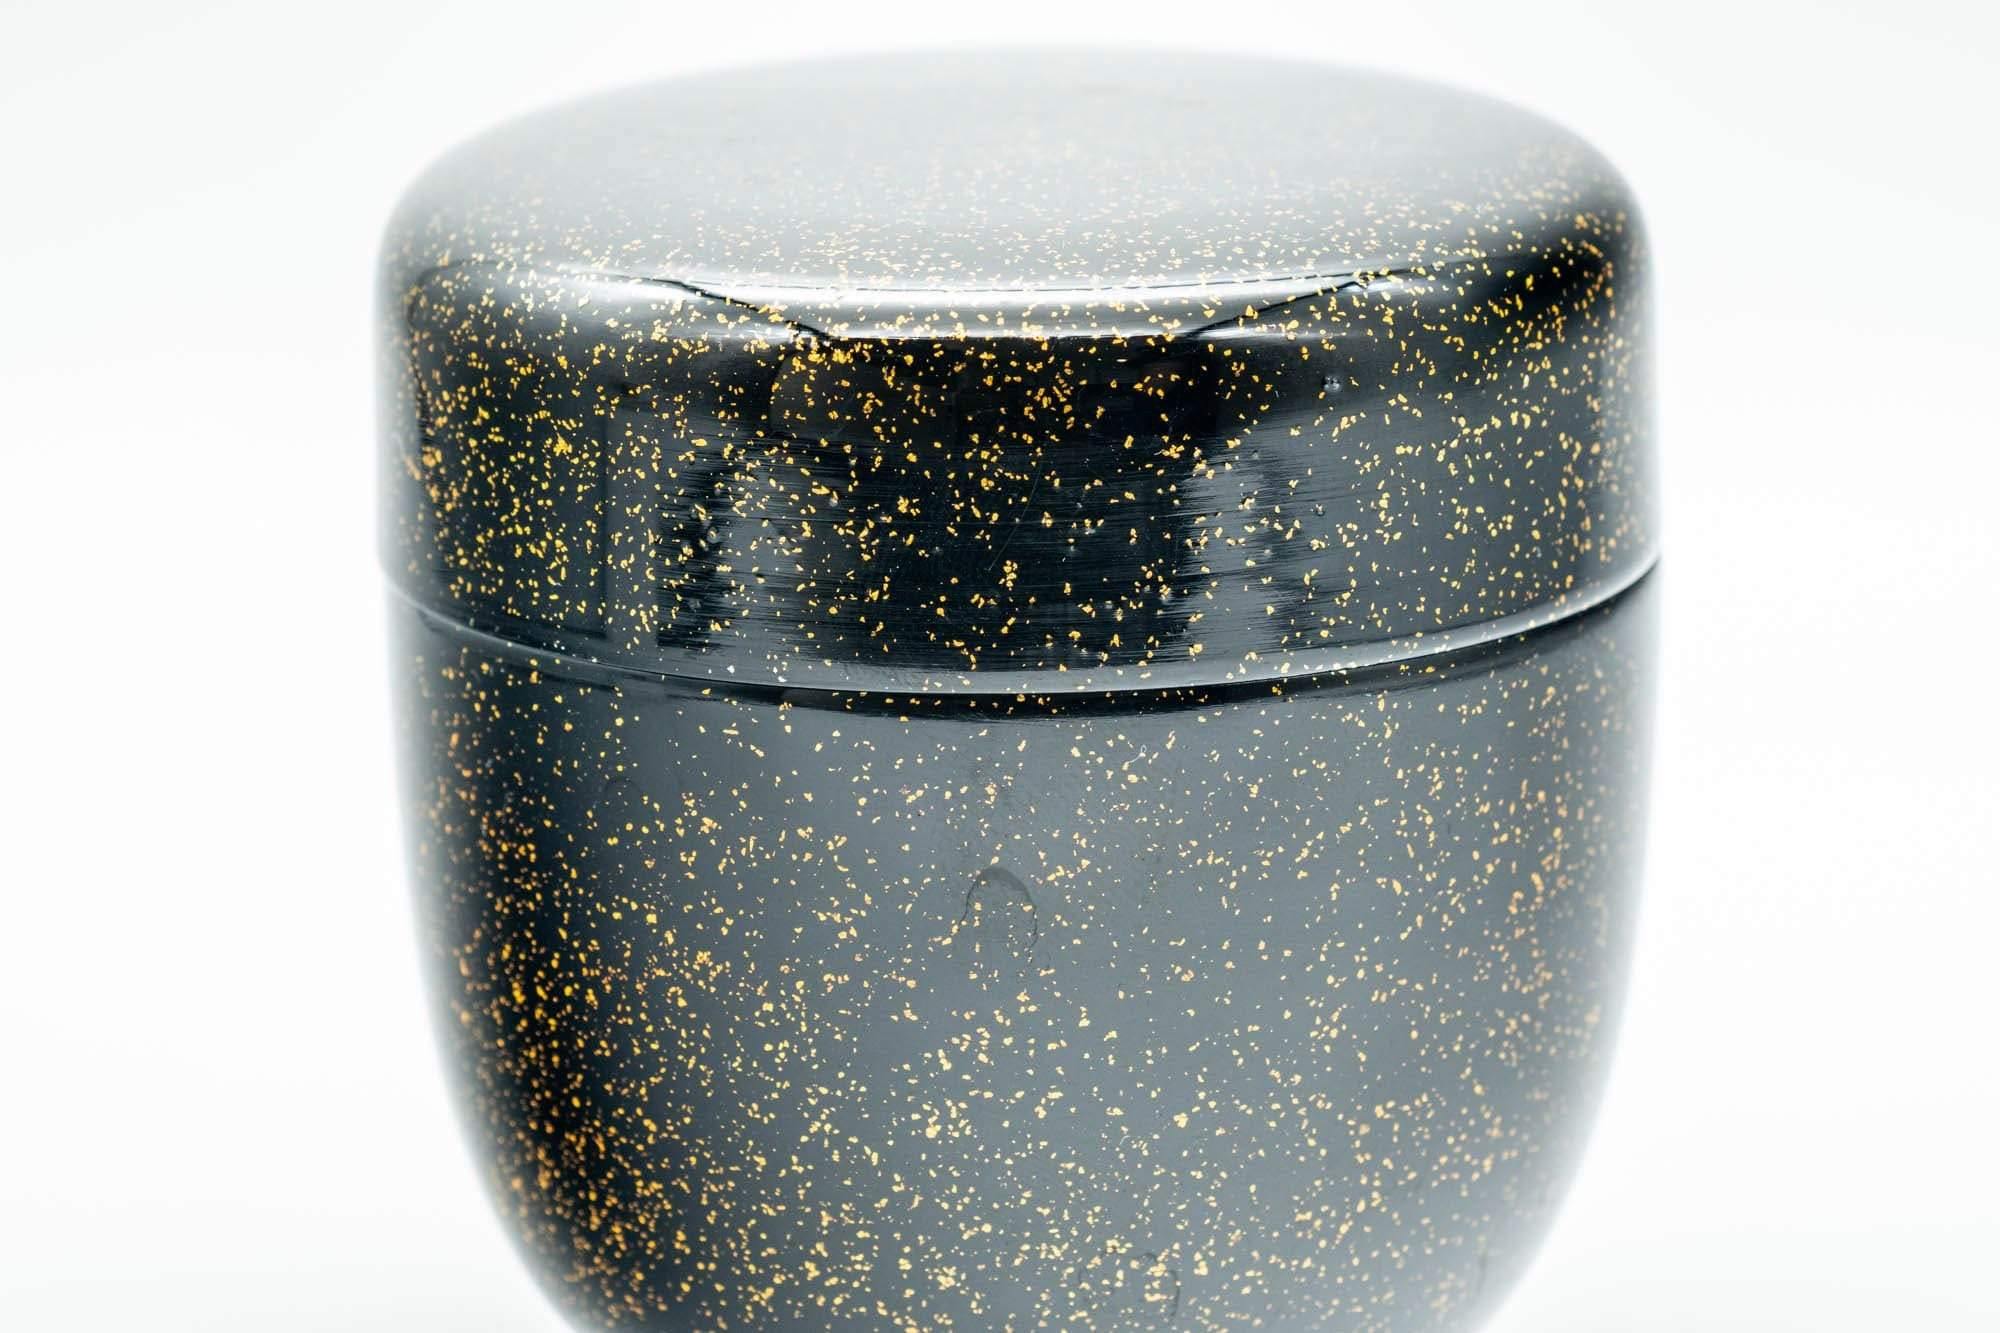 Japanese Natsume - Gold Speckled Black Lacquer Matcha Tea Caddy - 100ml - Tezumi